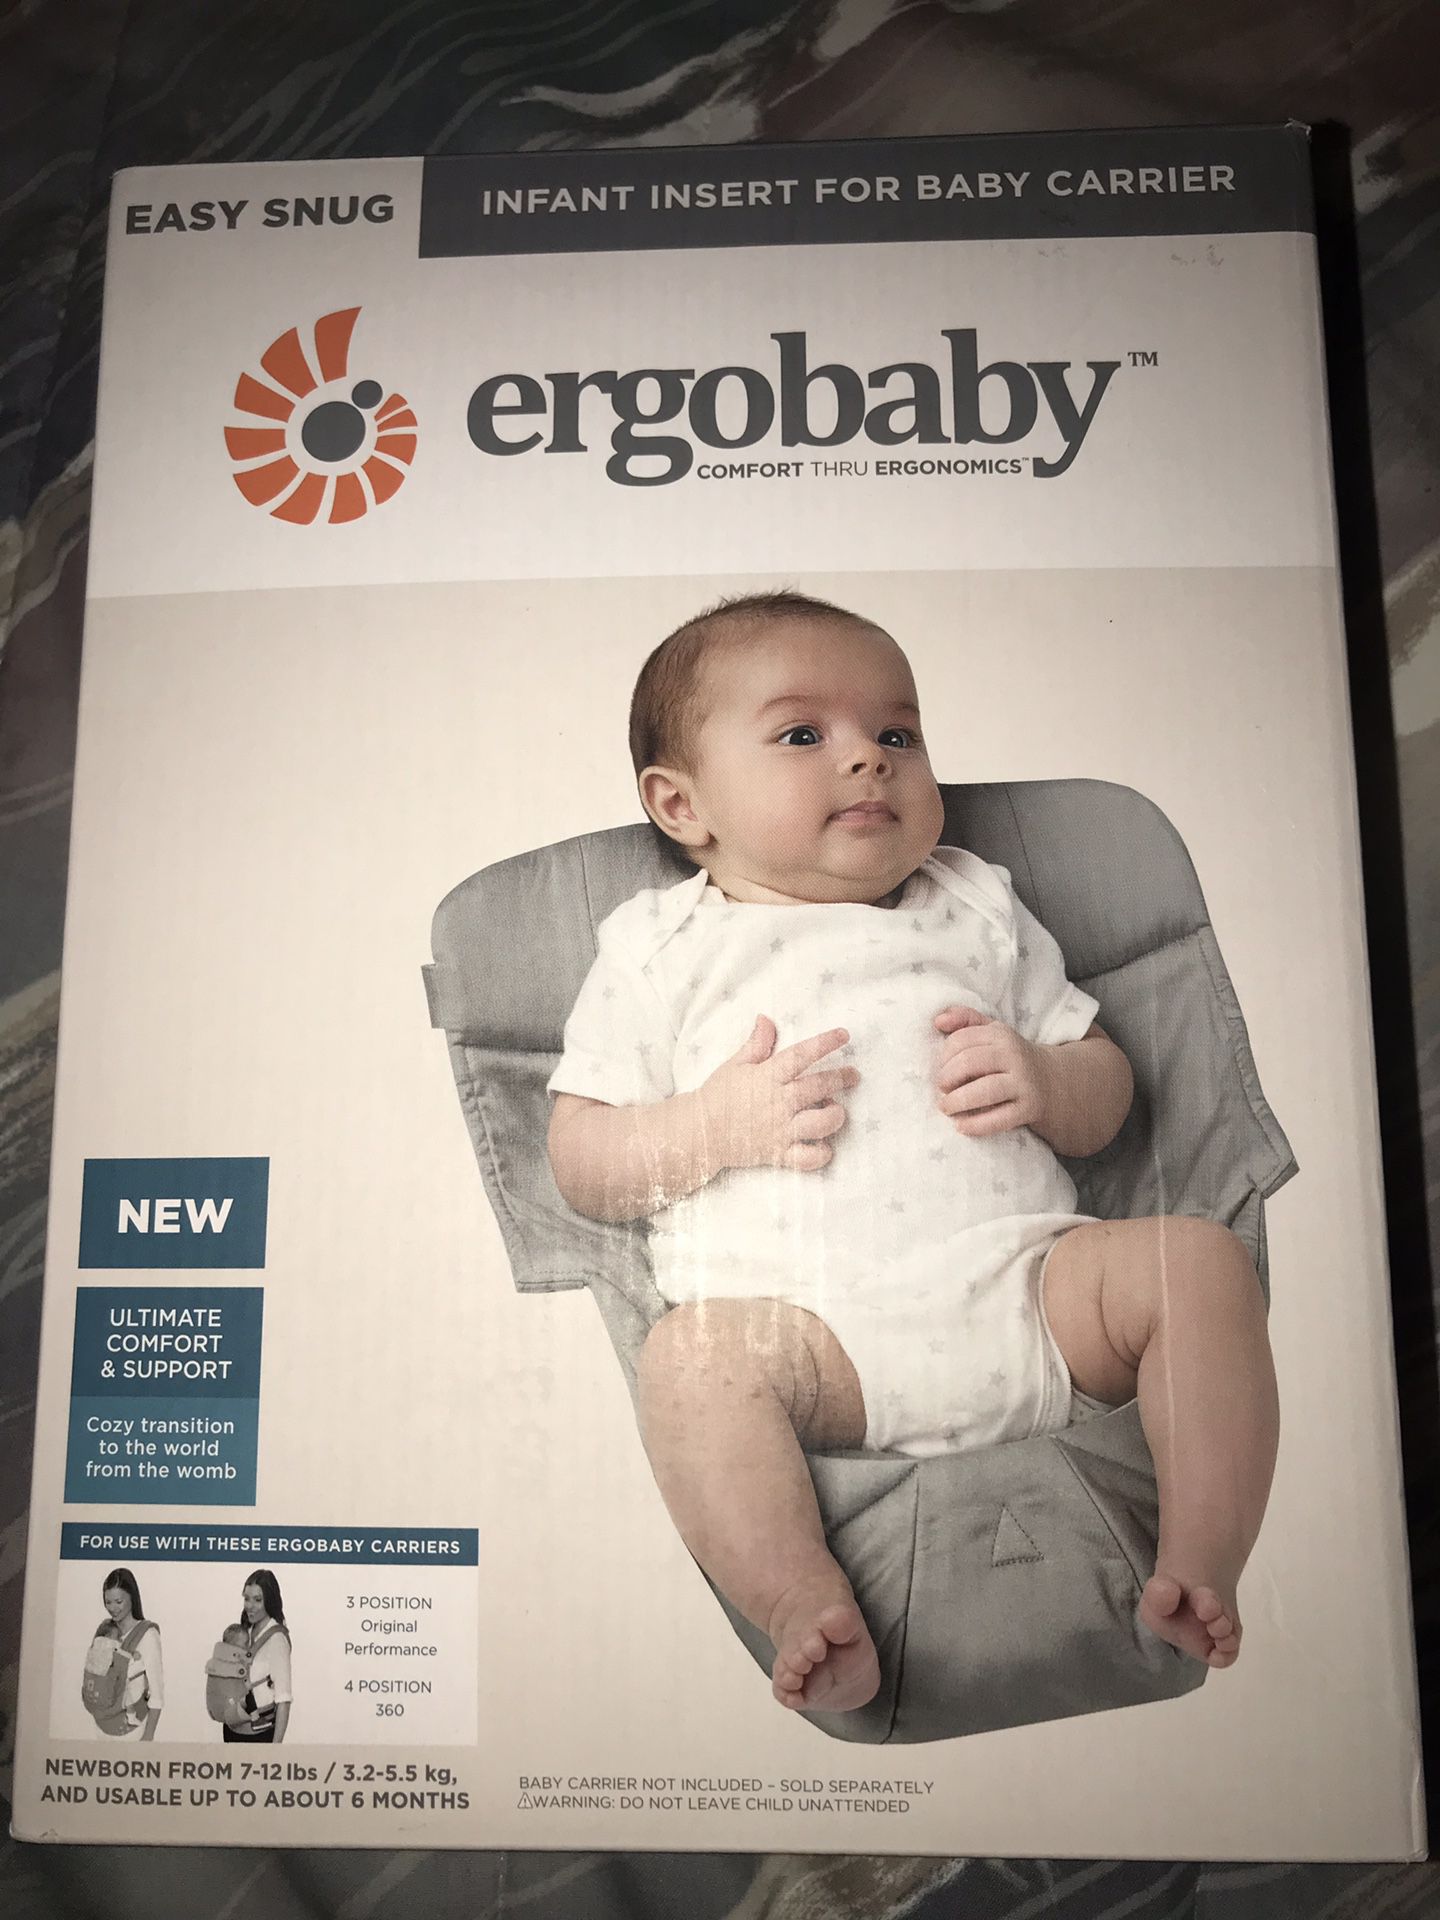 Insert for ergo baby carriers